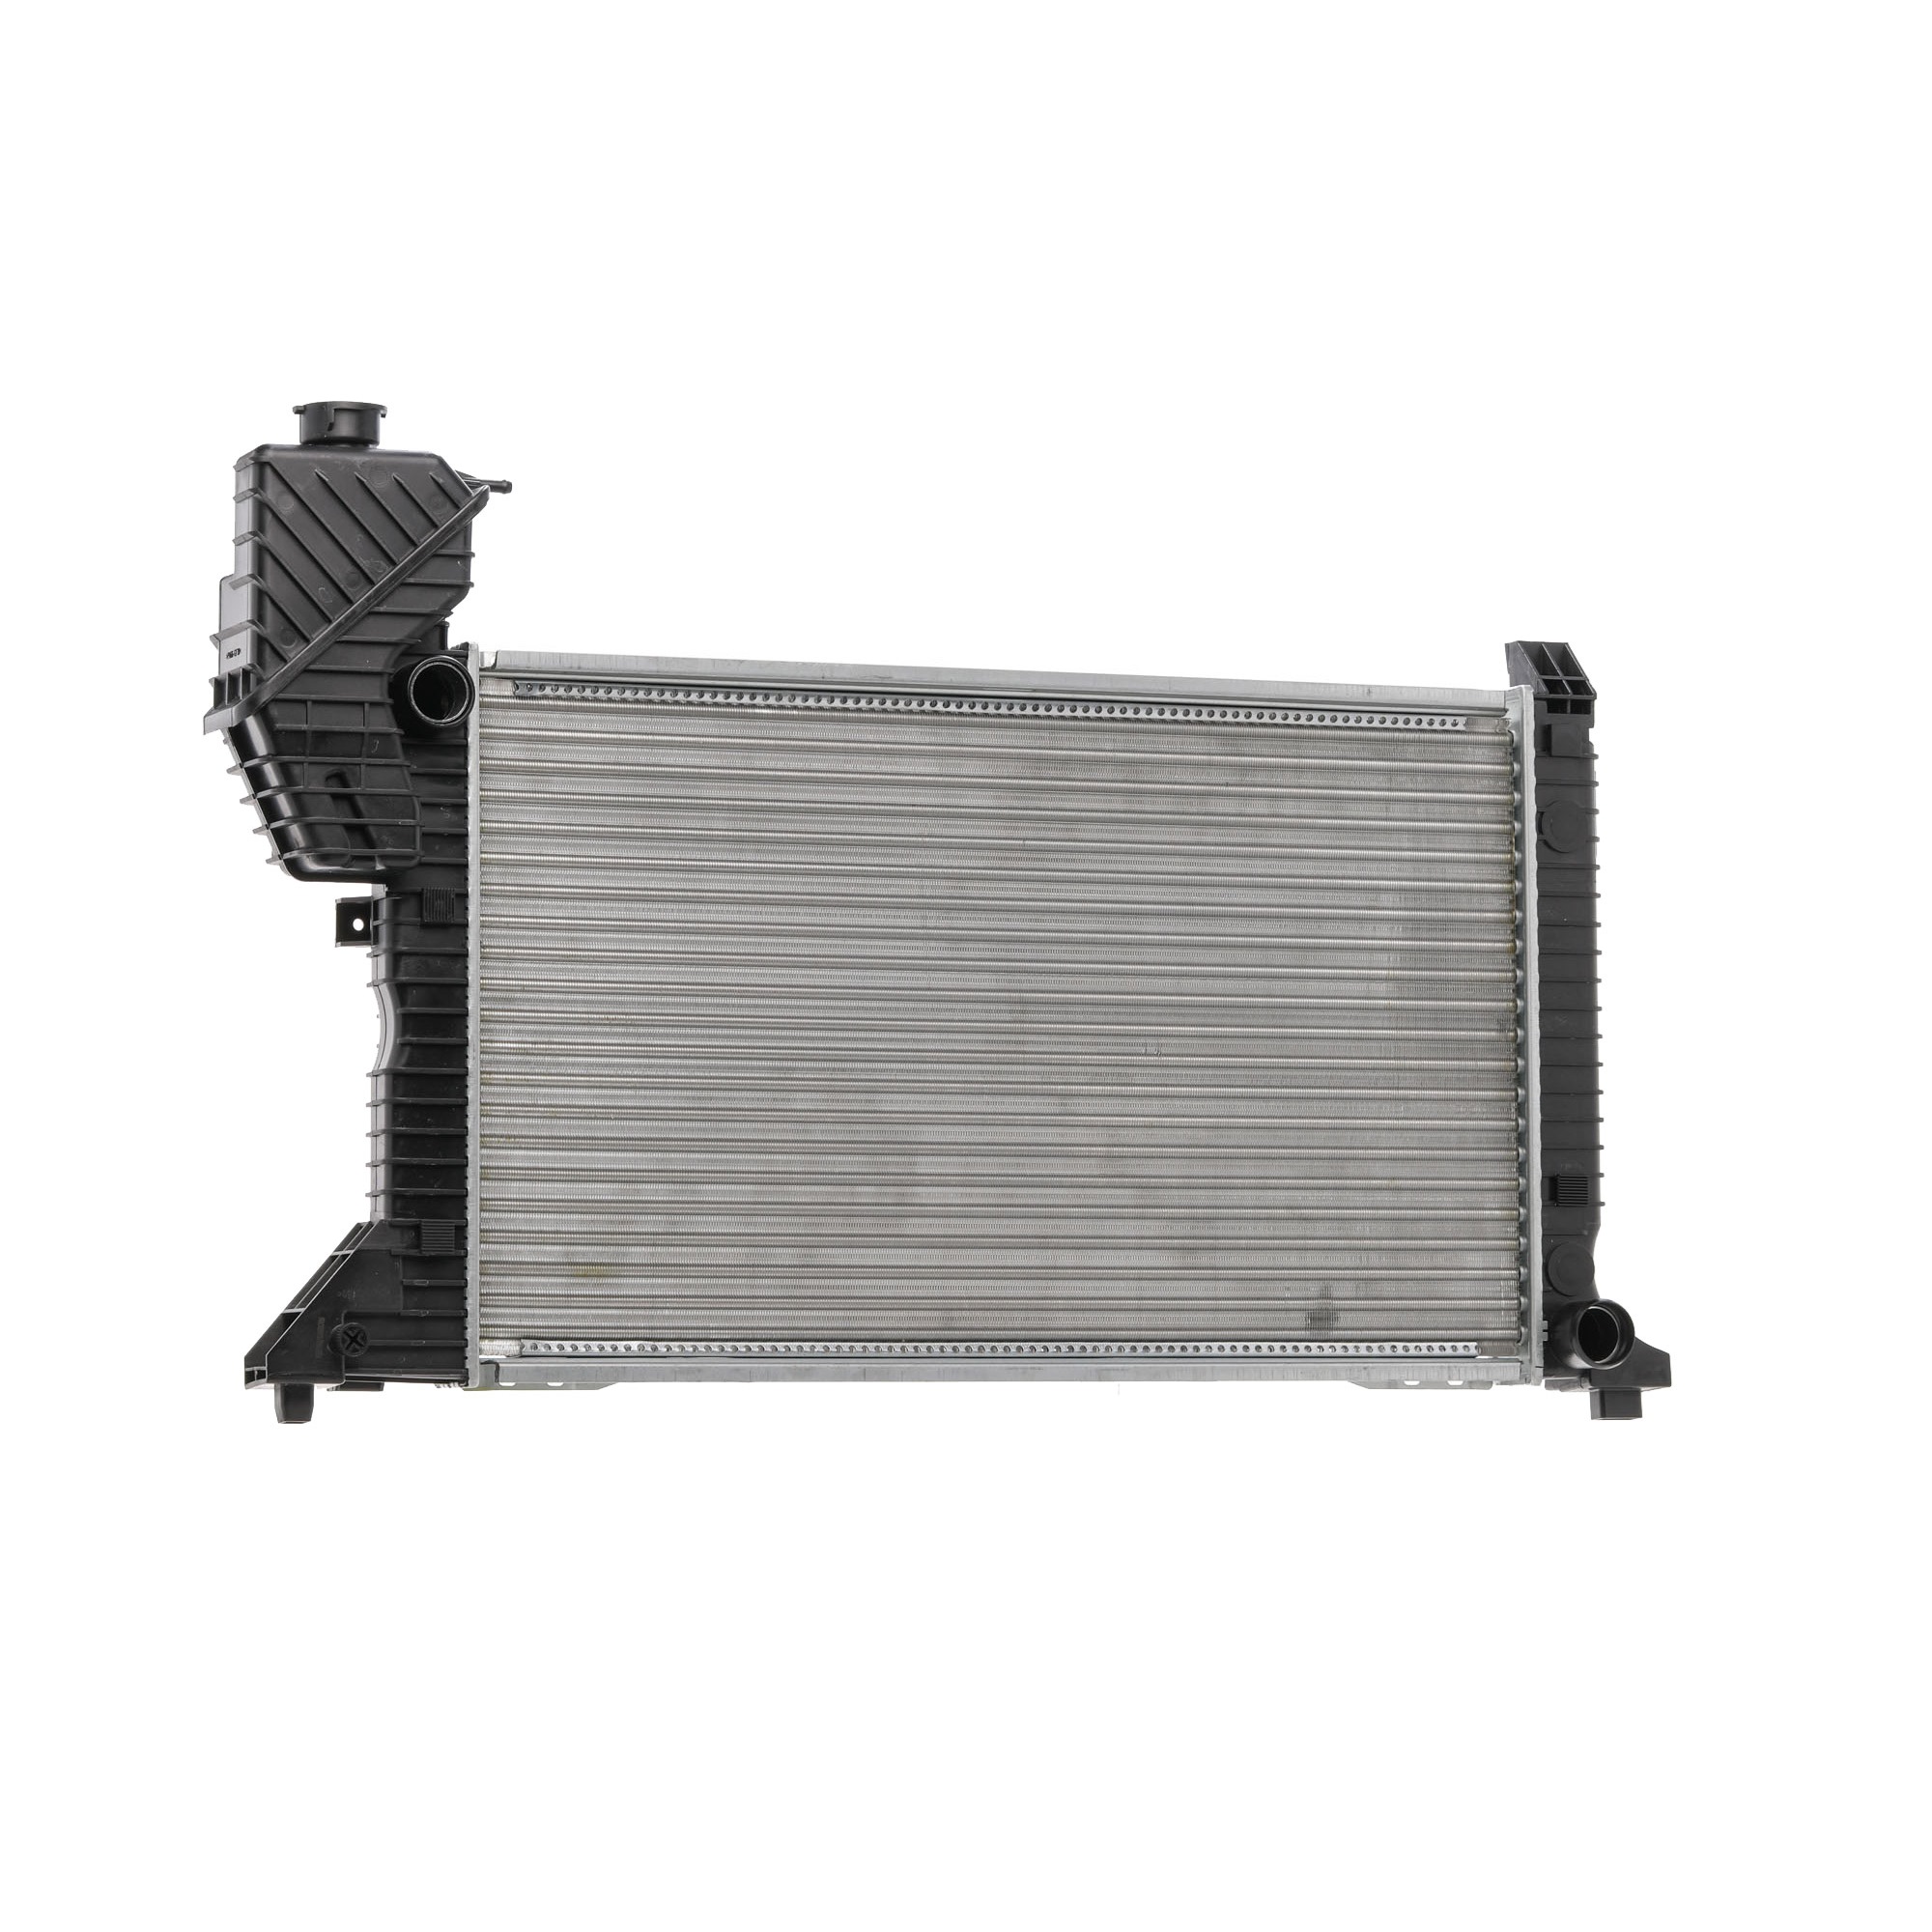 RIDEX Brazed cooling fins Core Dimensions: 680x408x42 Radiator 470R0493 buy